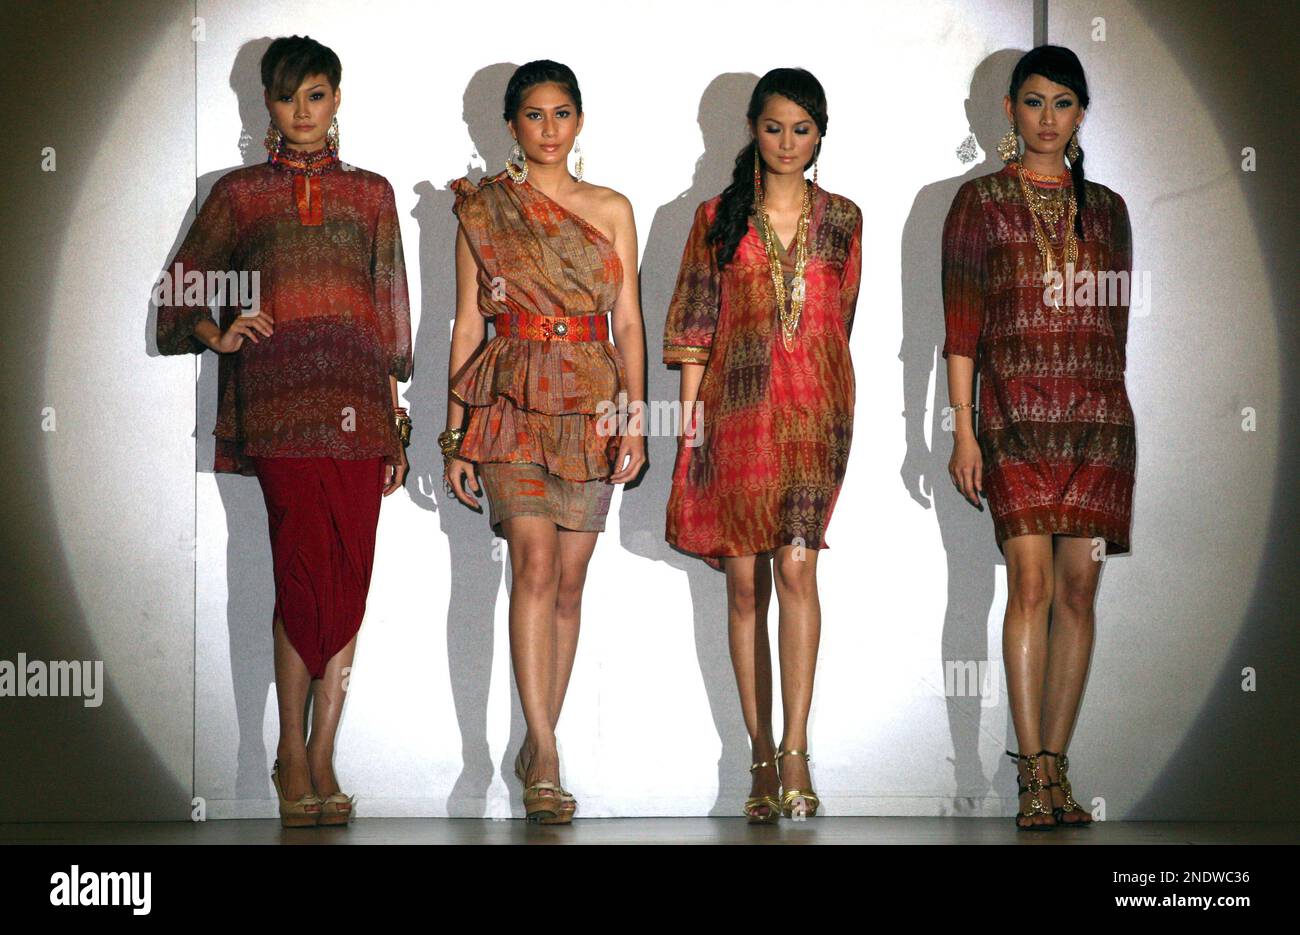 Indonesian models sport batik dress designed by Alleira during a show in  Jakarta, Indonesia, Friday, April 30, 2010. (AP Photo/Achmad Ibrahim Stock  Photo - Alamy